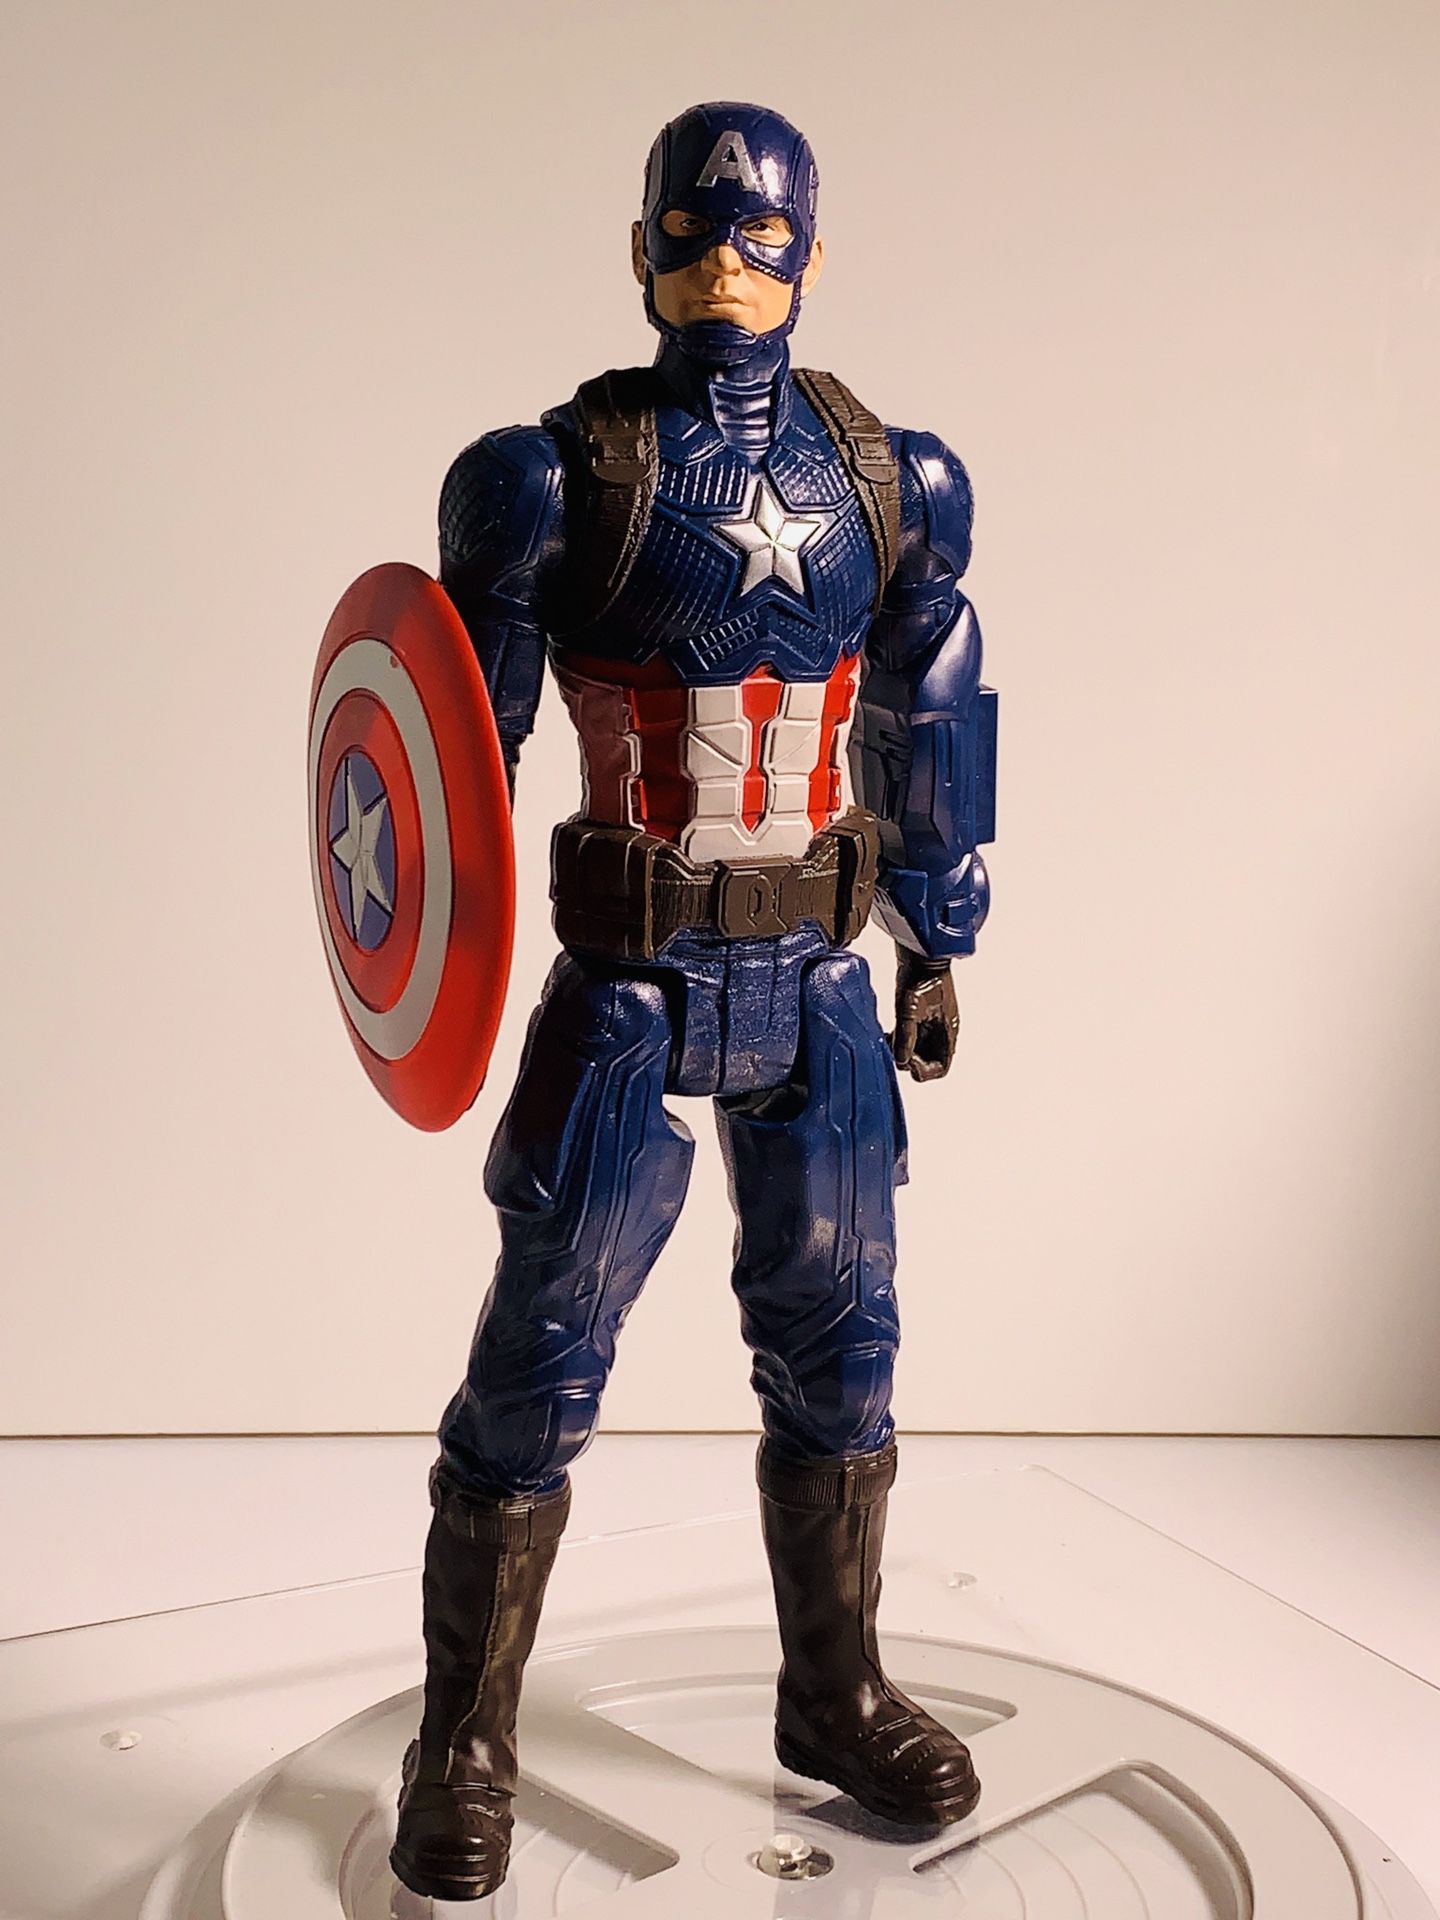 Marvel 12” Captain America Toy Figure with Shield